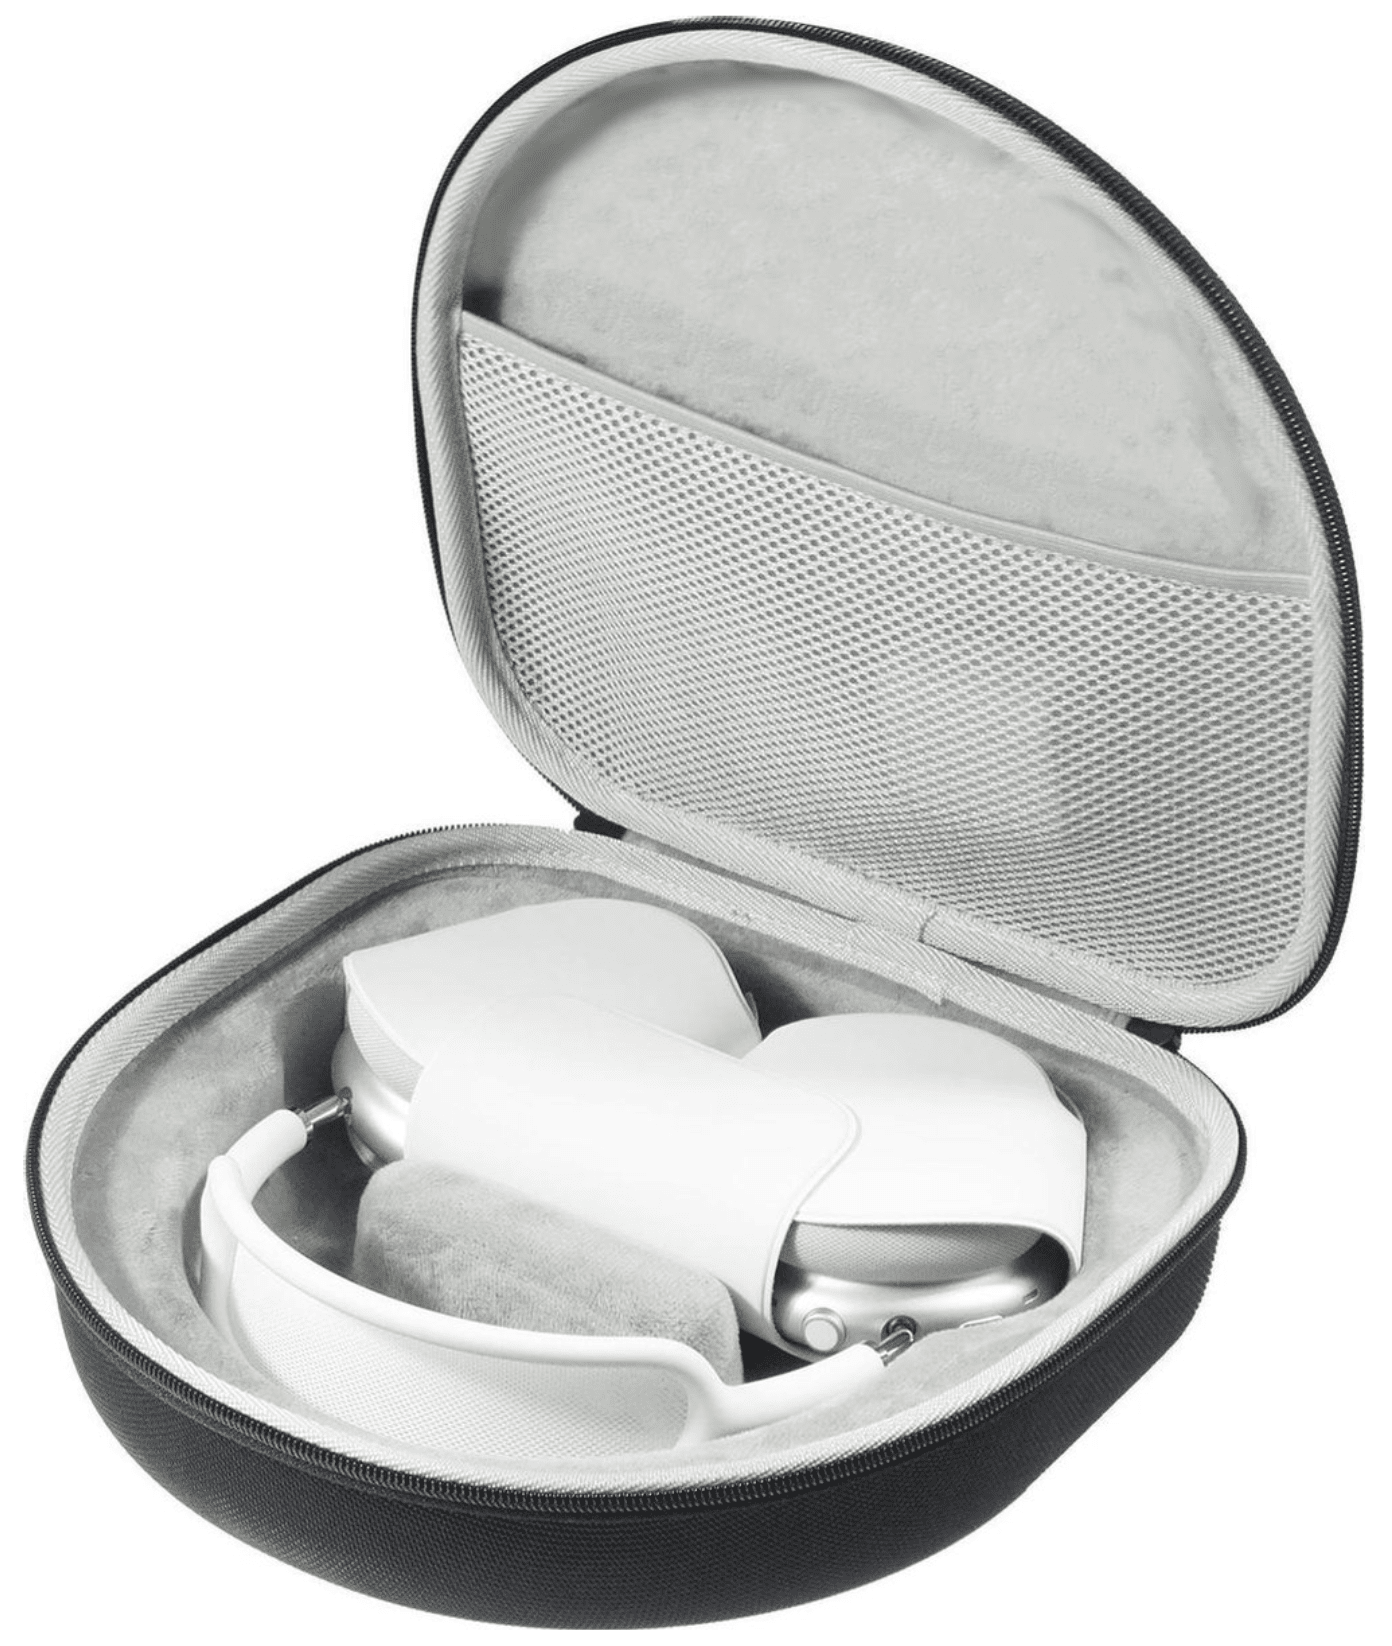 AirPods Max case third party